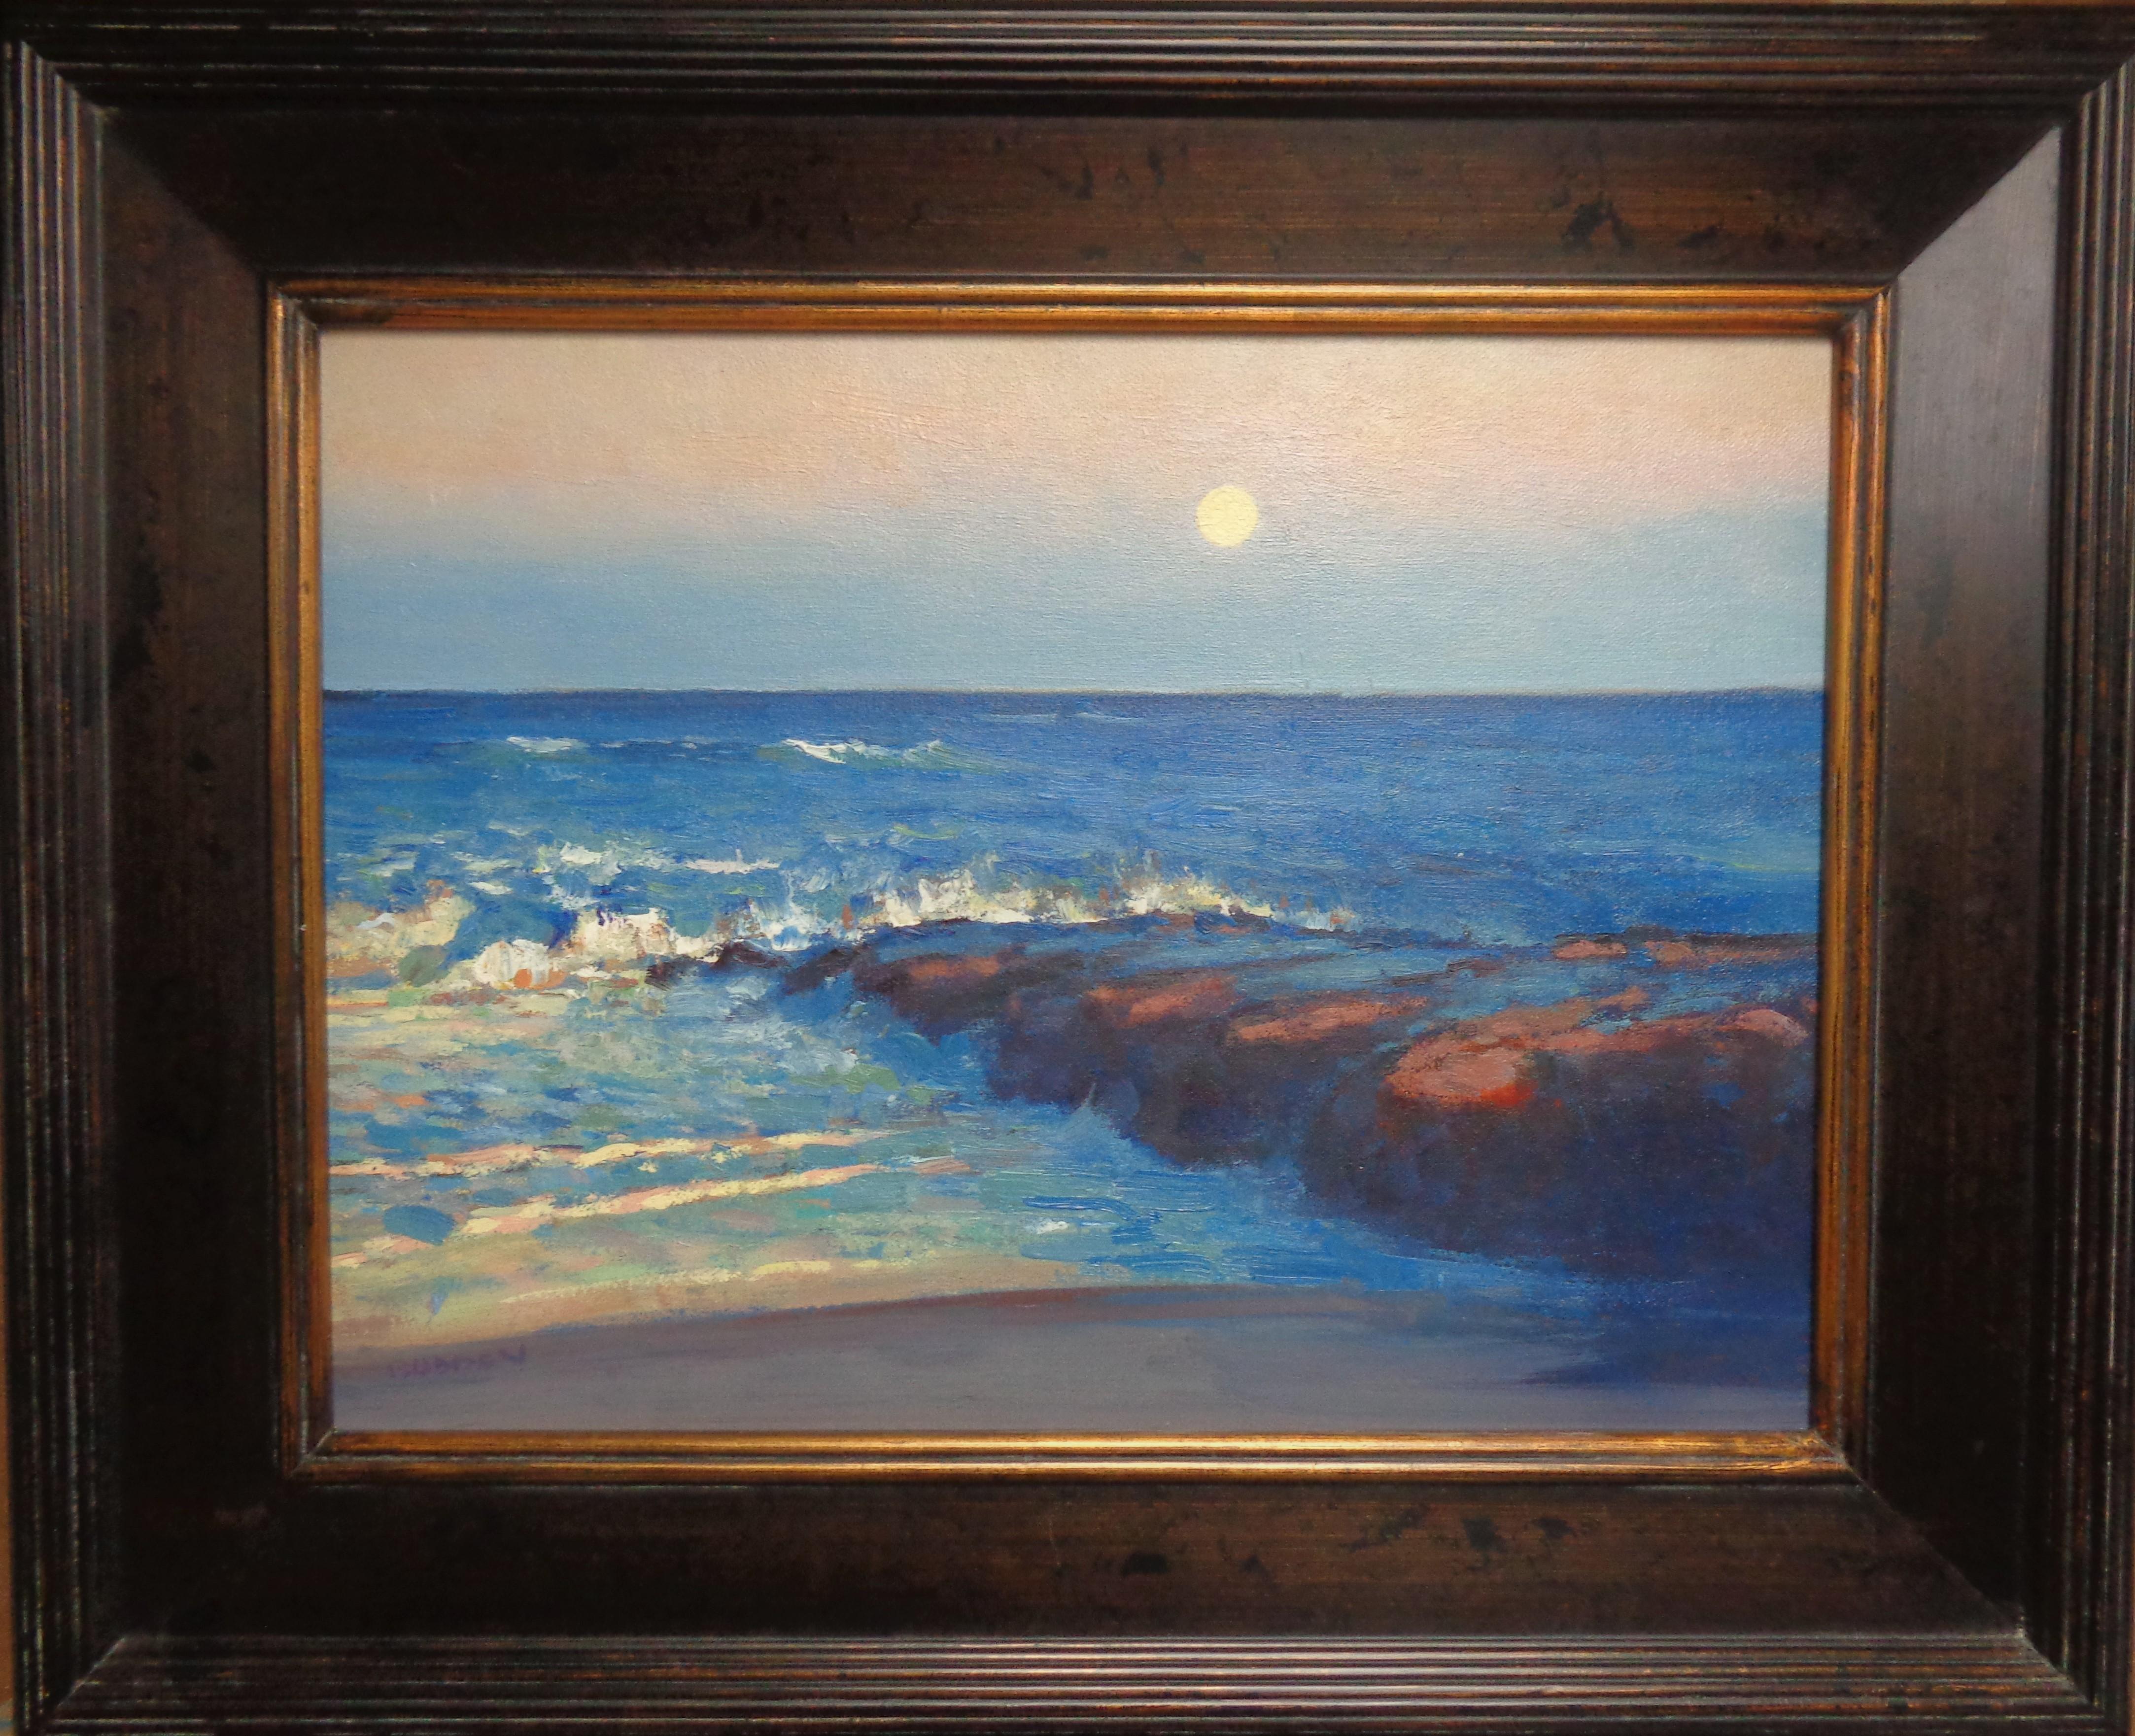 An oil painting on canvas by award winning contemporary artist Michael Budden that showcases a romantic moonlit seascape created in an impressionistic realism style with wonderful brushwork and palette knife use. The painting exudes the very rich